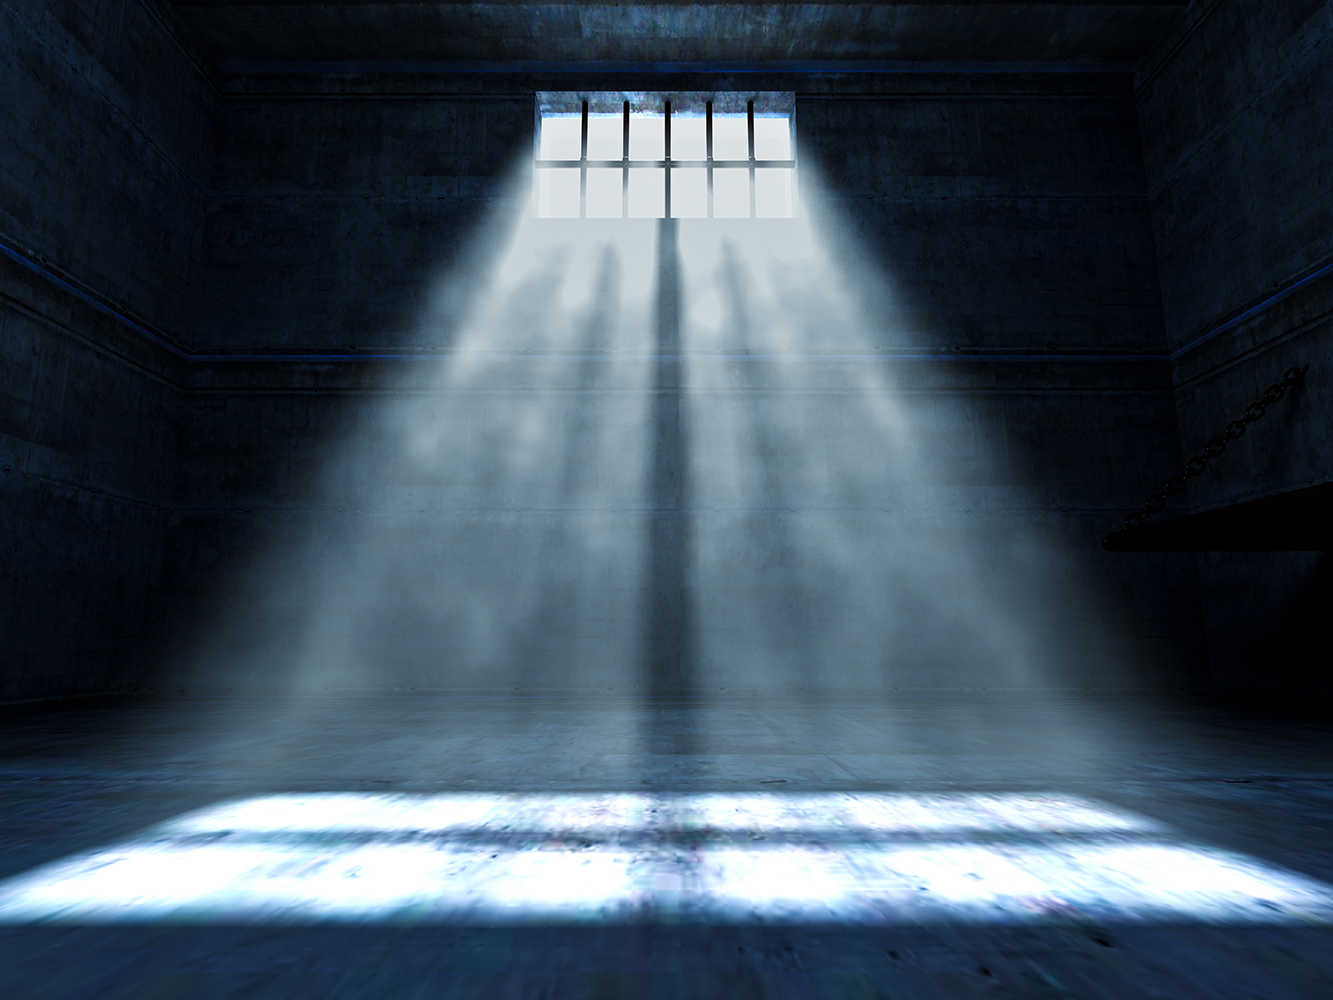 A ghostly light falls through a small barred window in an empty jail cell